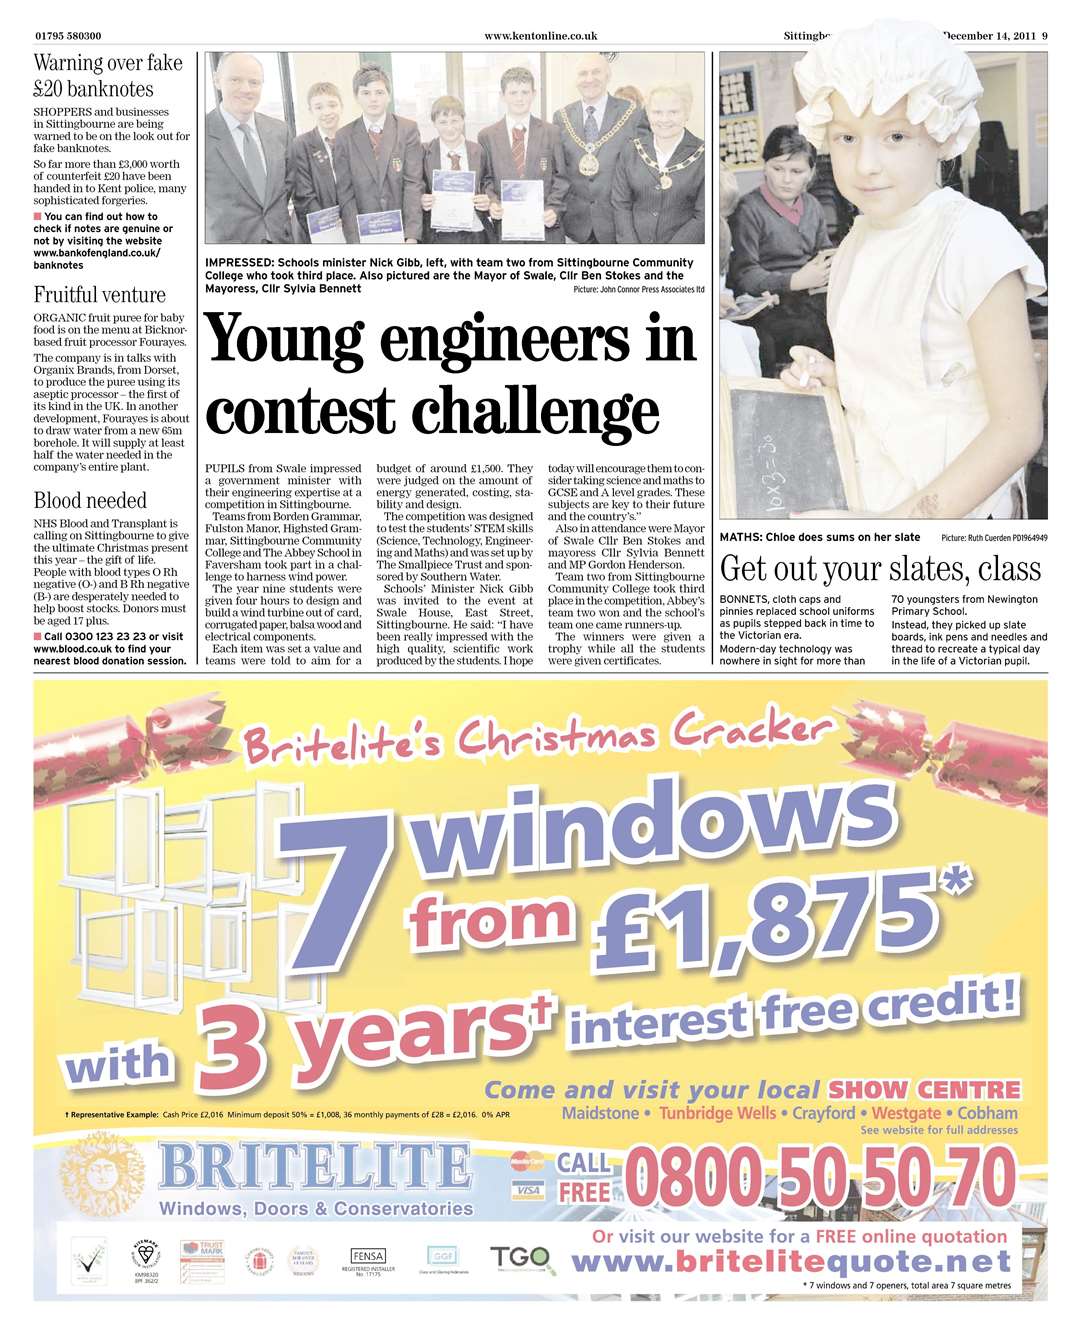 A page from the new Sittingbourne News Extra, launched in 2011